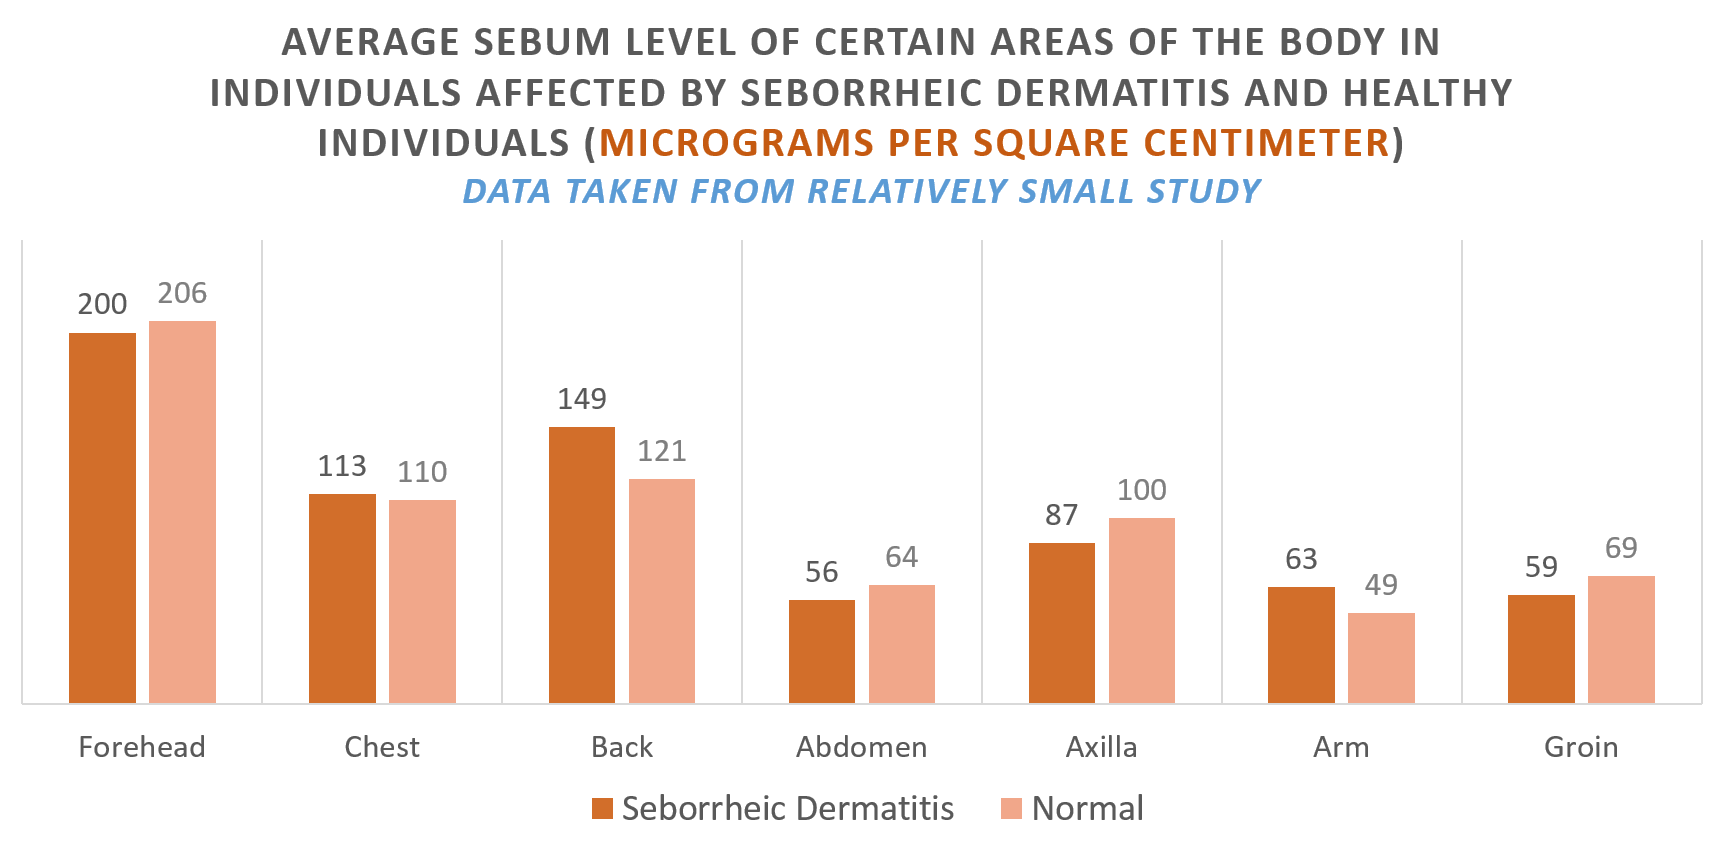 Average Sebum Level Of Certain Areas Of The Body In Individuals Affected By Seborrheic Dermatitis and Healthy Individuals